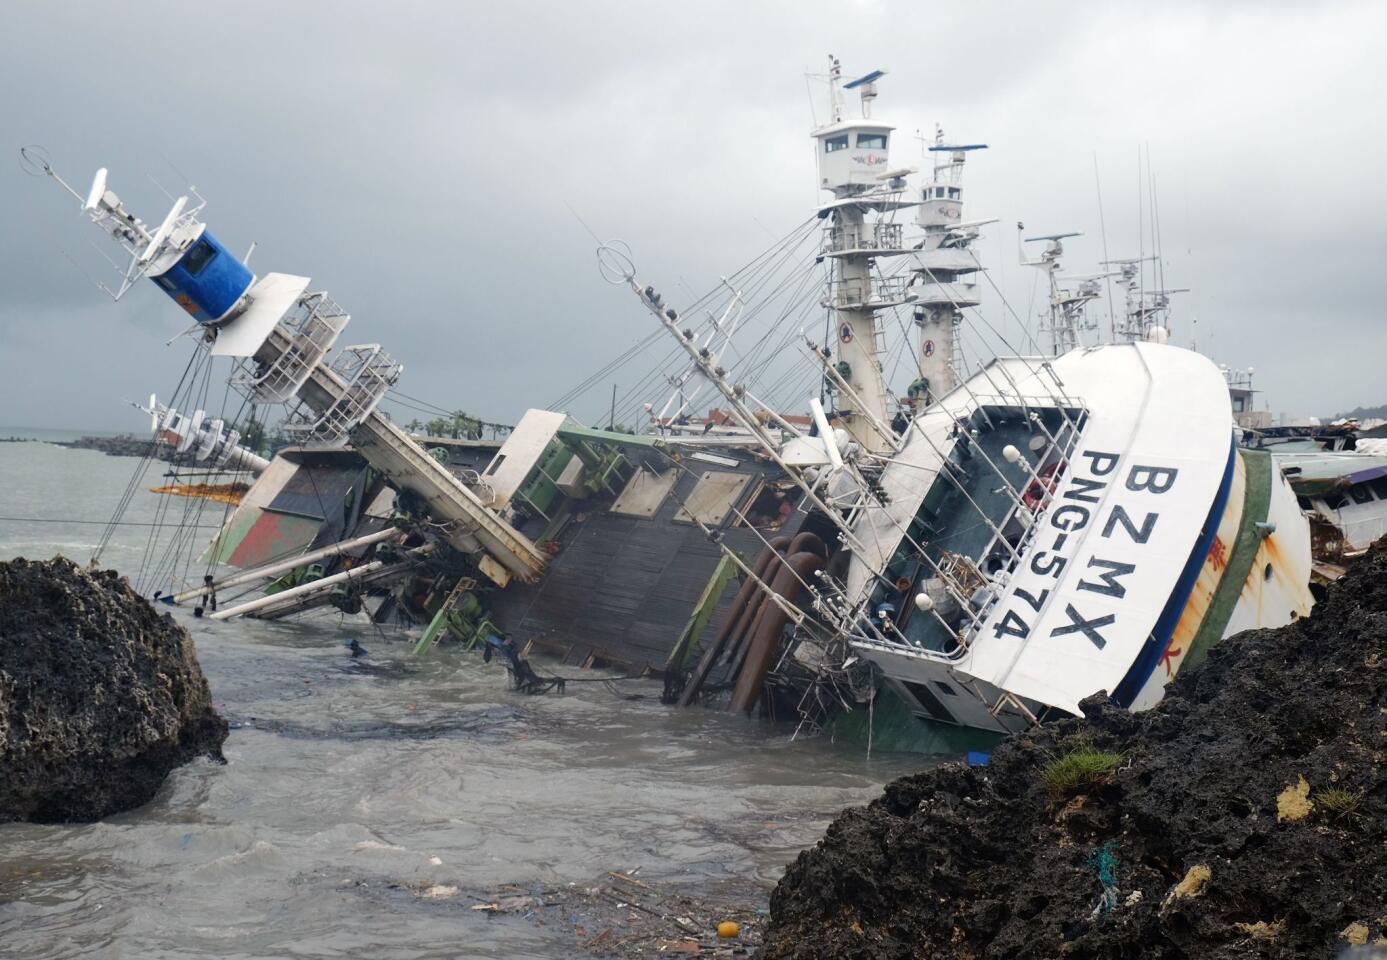 An overturned fishing boat lies in the aftermath of Typhoon Meranti in Kaohsiung, Taiwan. Parts of Taiwan came to a standstill as the powerful storm brought the strongest winds the country has seen in 21 years. China issued a red alert for waves as the storm bore down on the mainland.